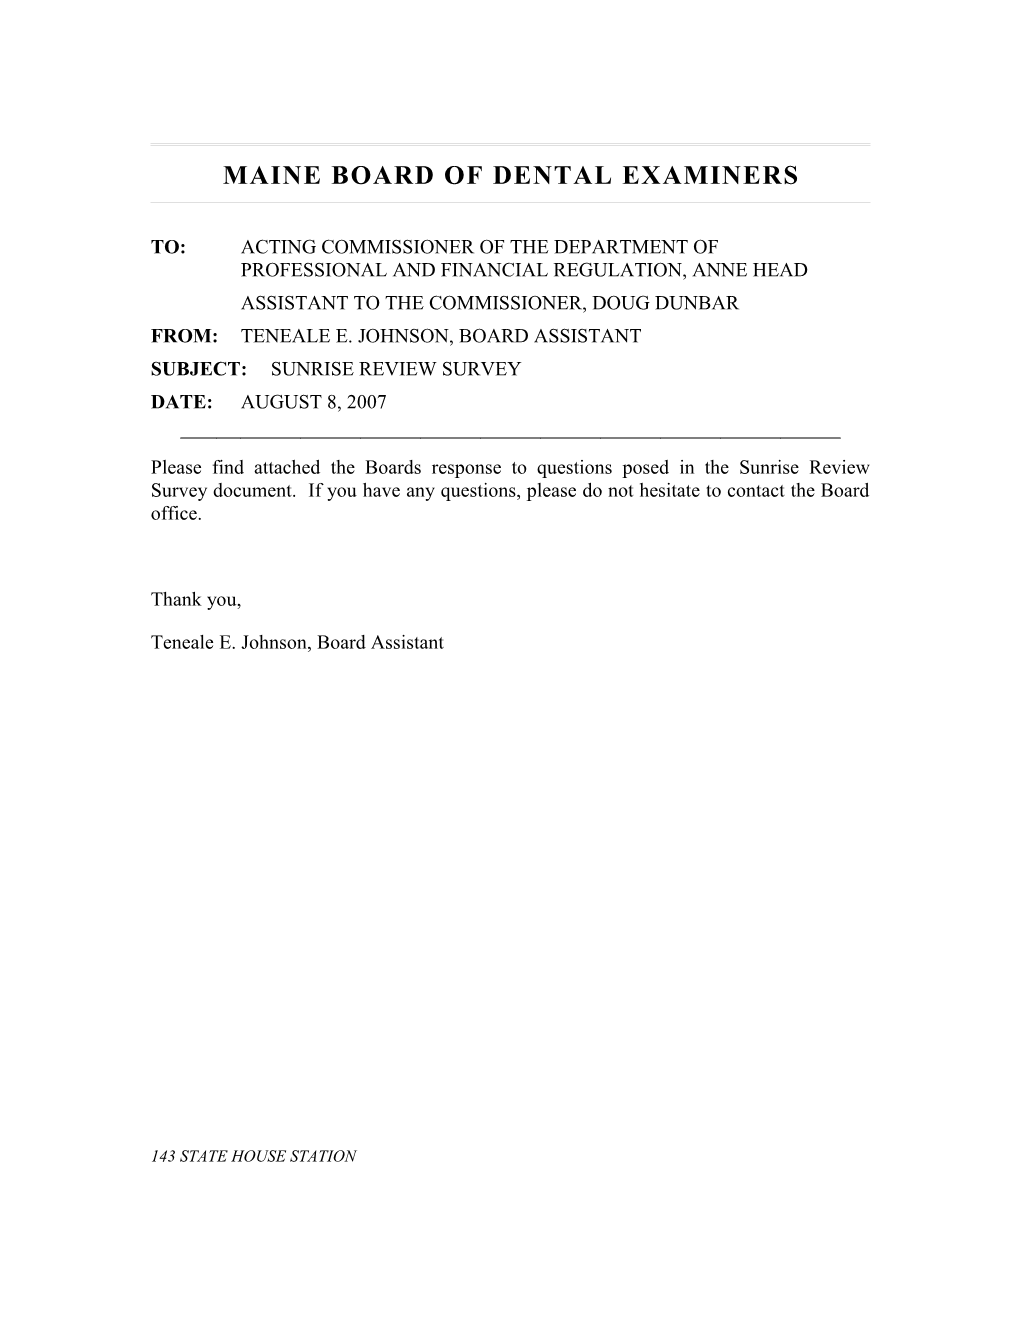 Maine Board of Dental Examiners